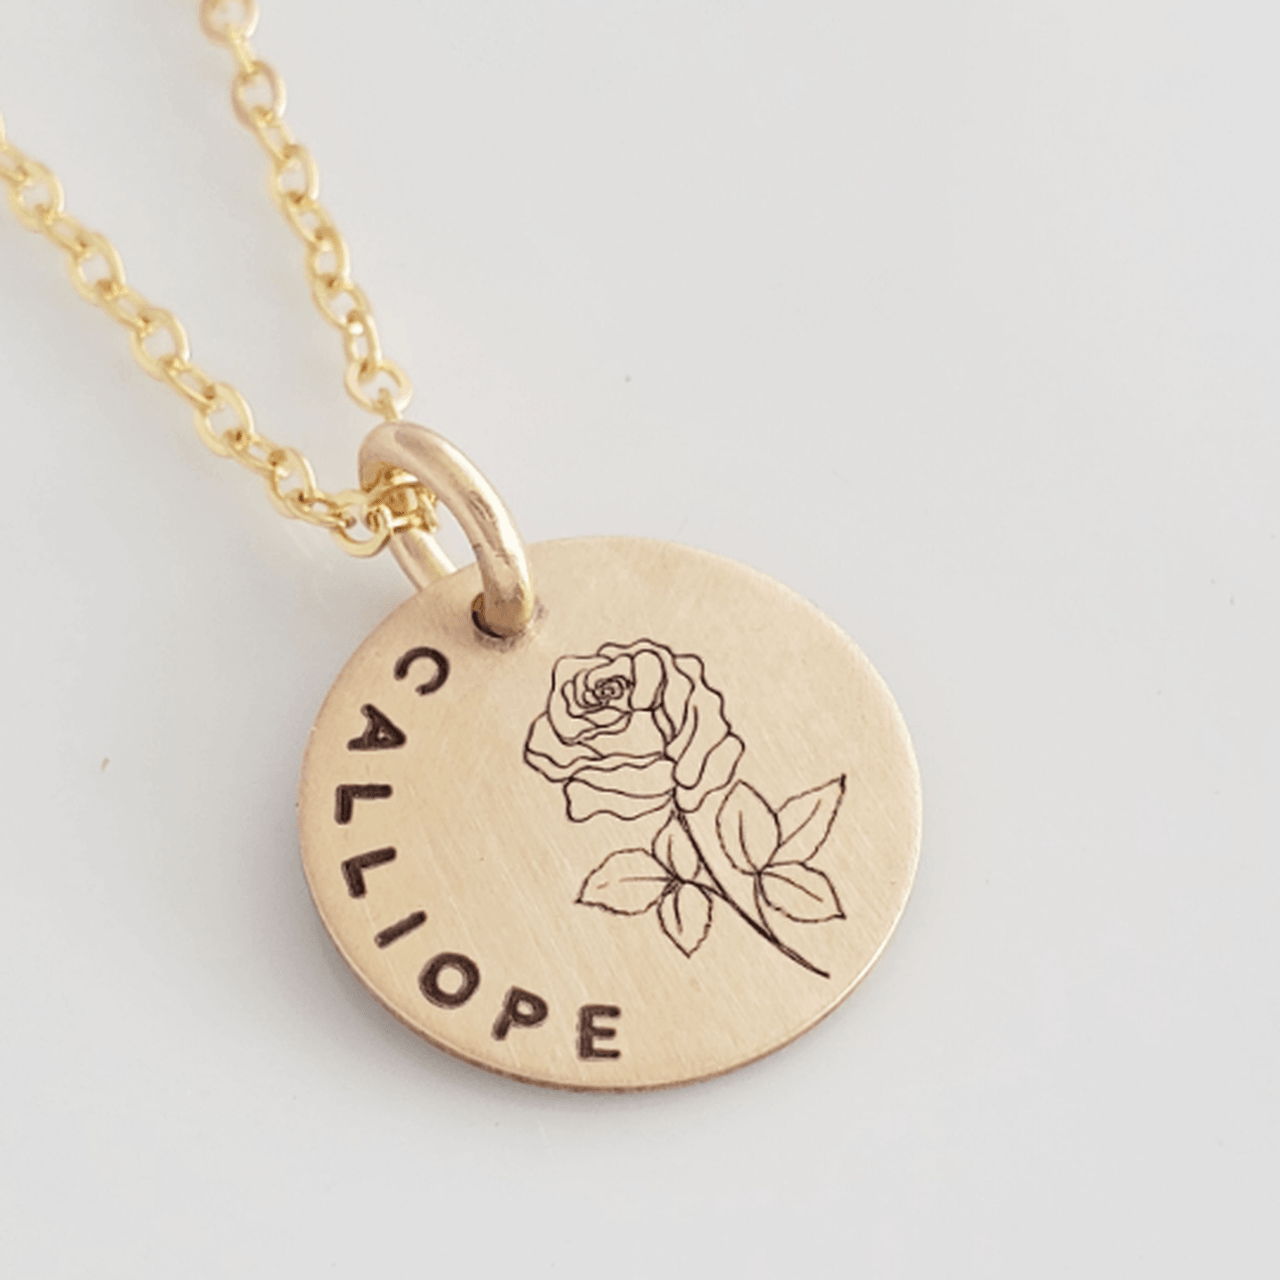 Birth Flower Necklace with Name - Going Golden